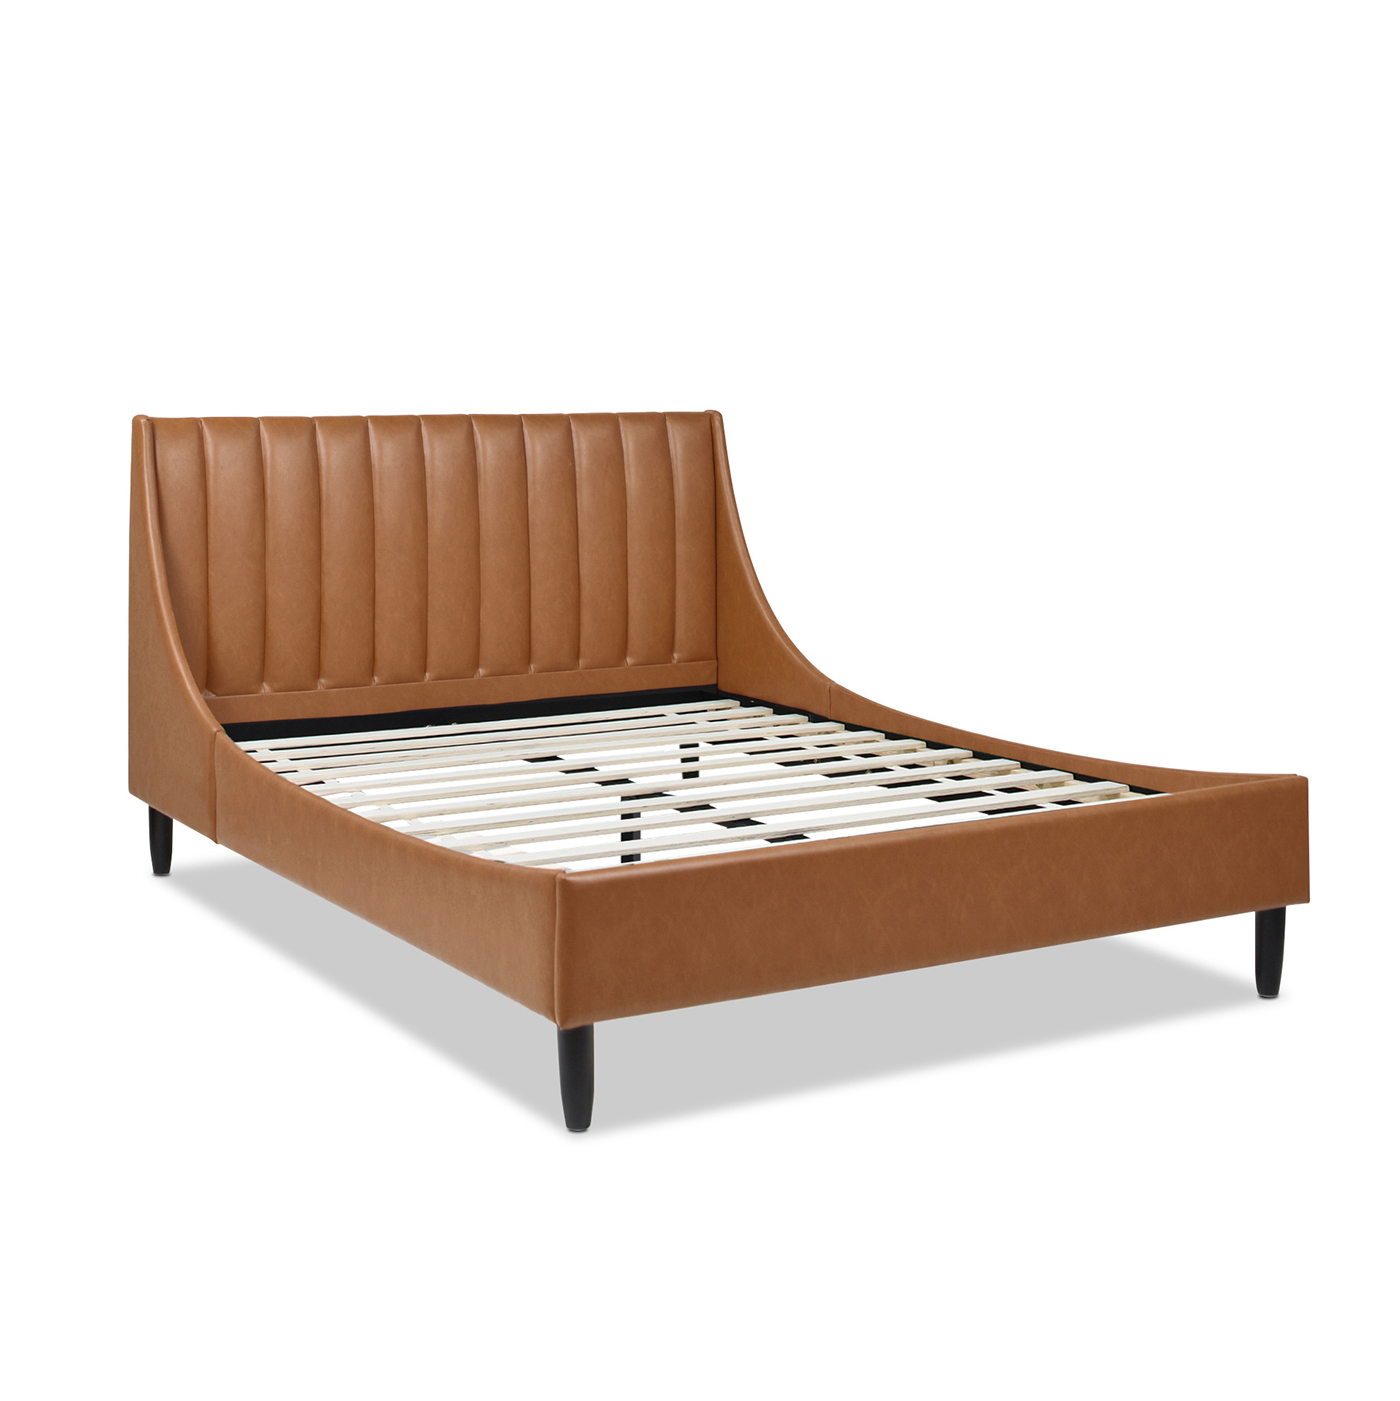 Tan Brown Faux Leather Upholstered Platform Queen Bed